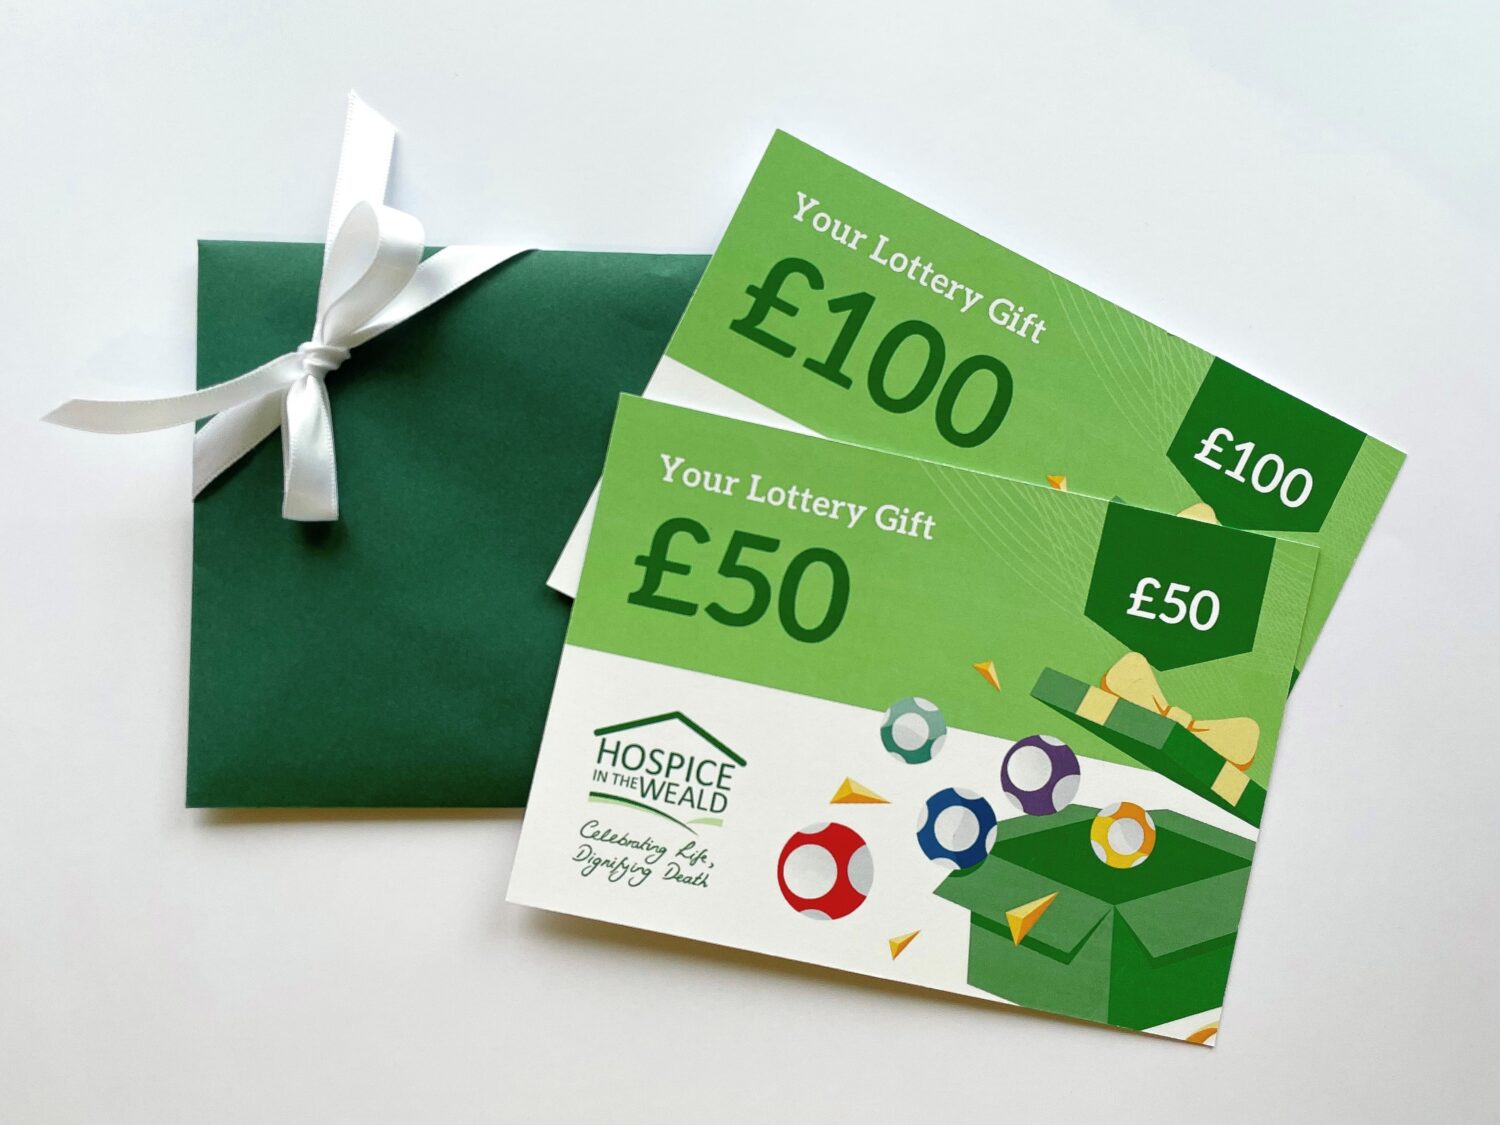 £50 and £100 Lottery Gift Voucher Photo